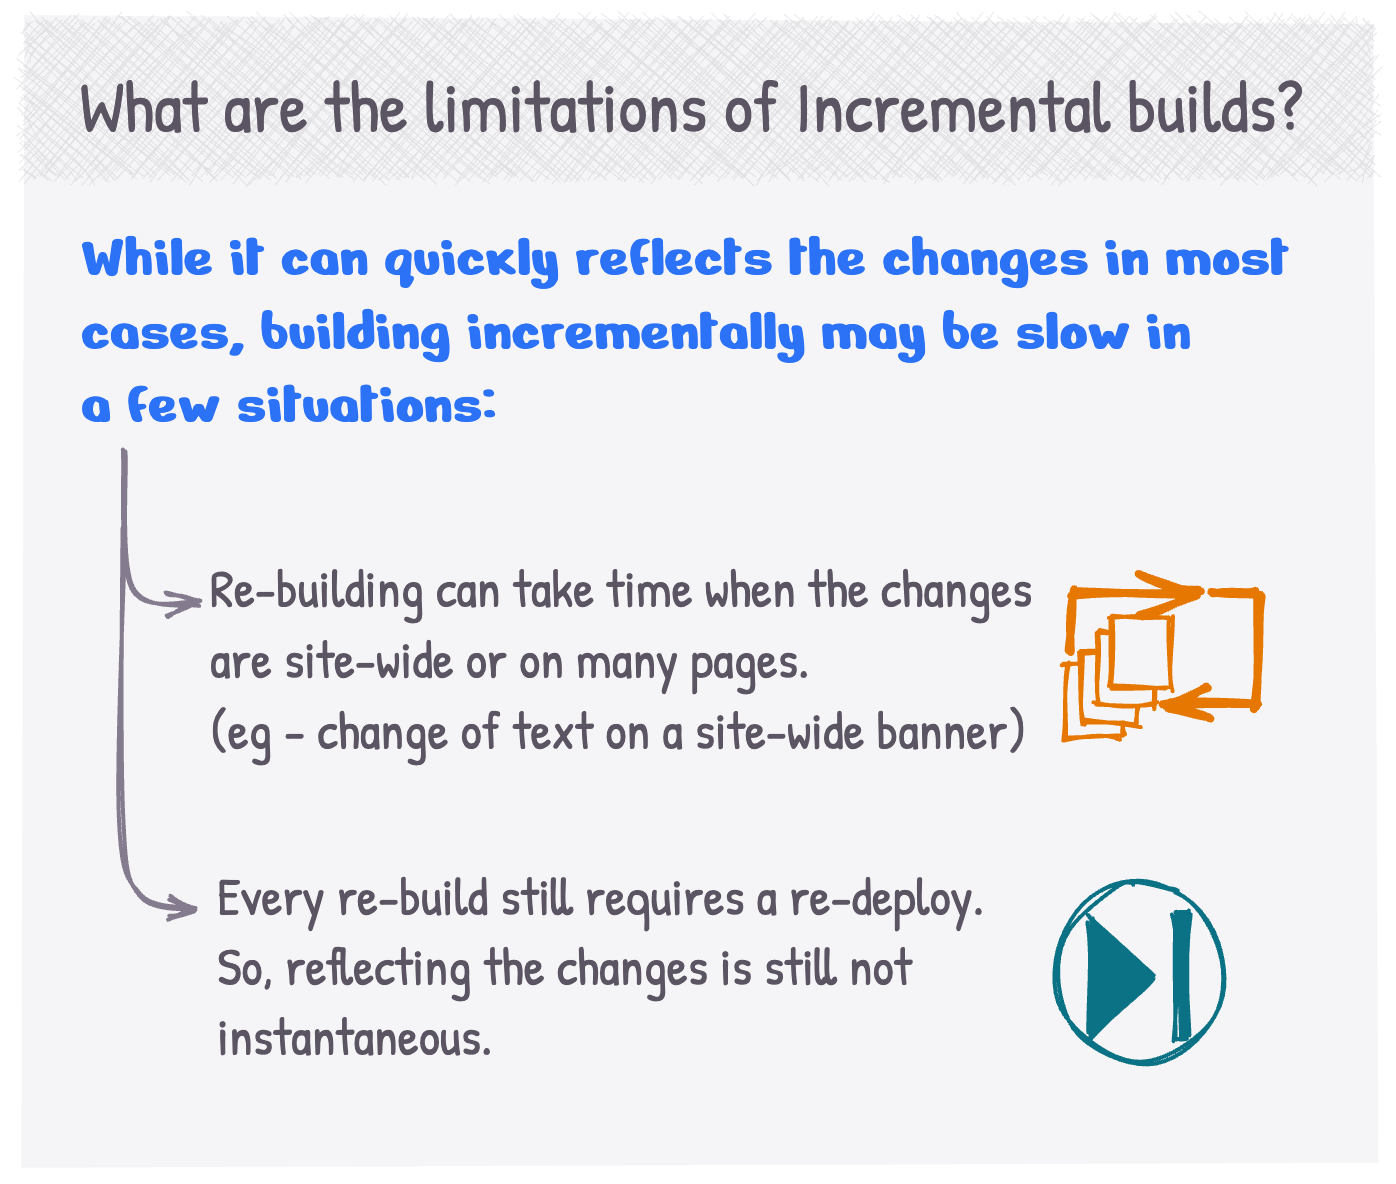 What are the limitations of Incremental builds?